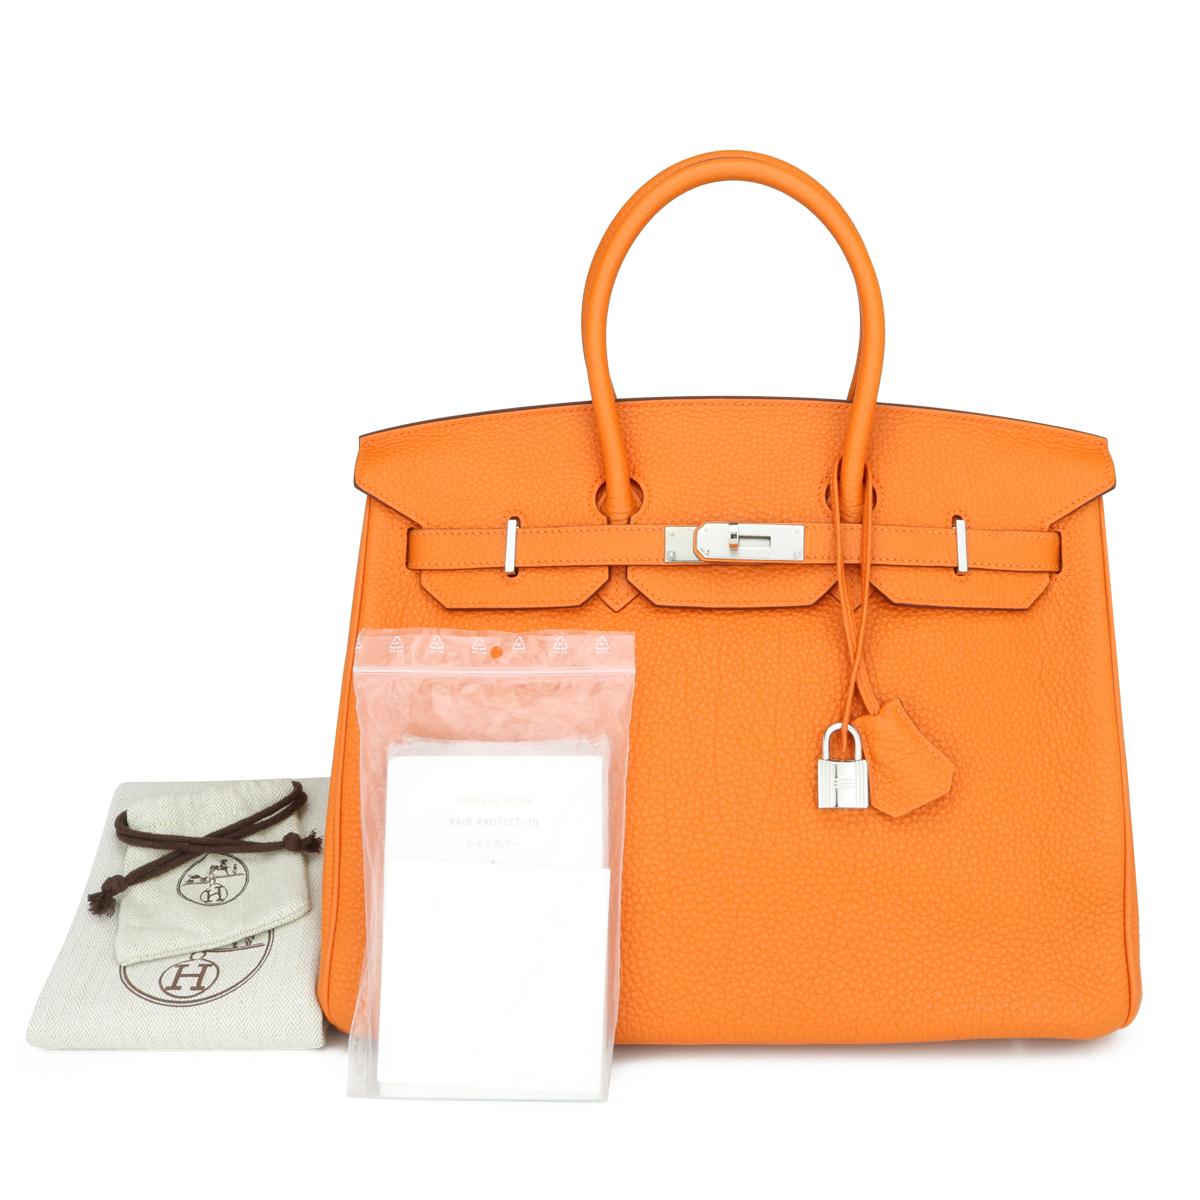 Hermès Birkin Bag 35cm Orange Togo Leather with Palladium Hardware Stamp N_Year 2010.

This bag is still in excellent condition. The leather still smells fresh, and it still holds to the original shape. The hardware is still very shiny.

A truly